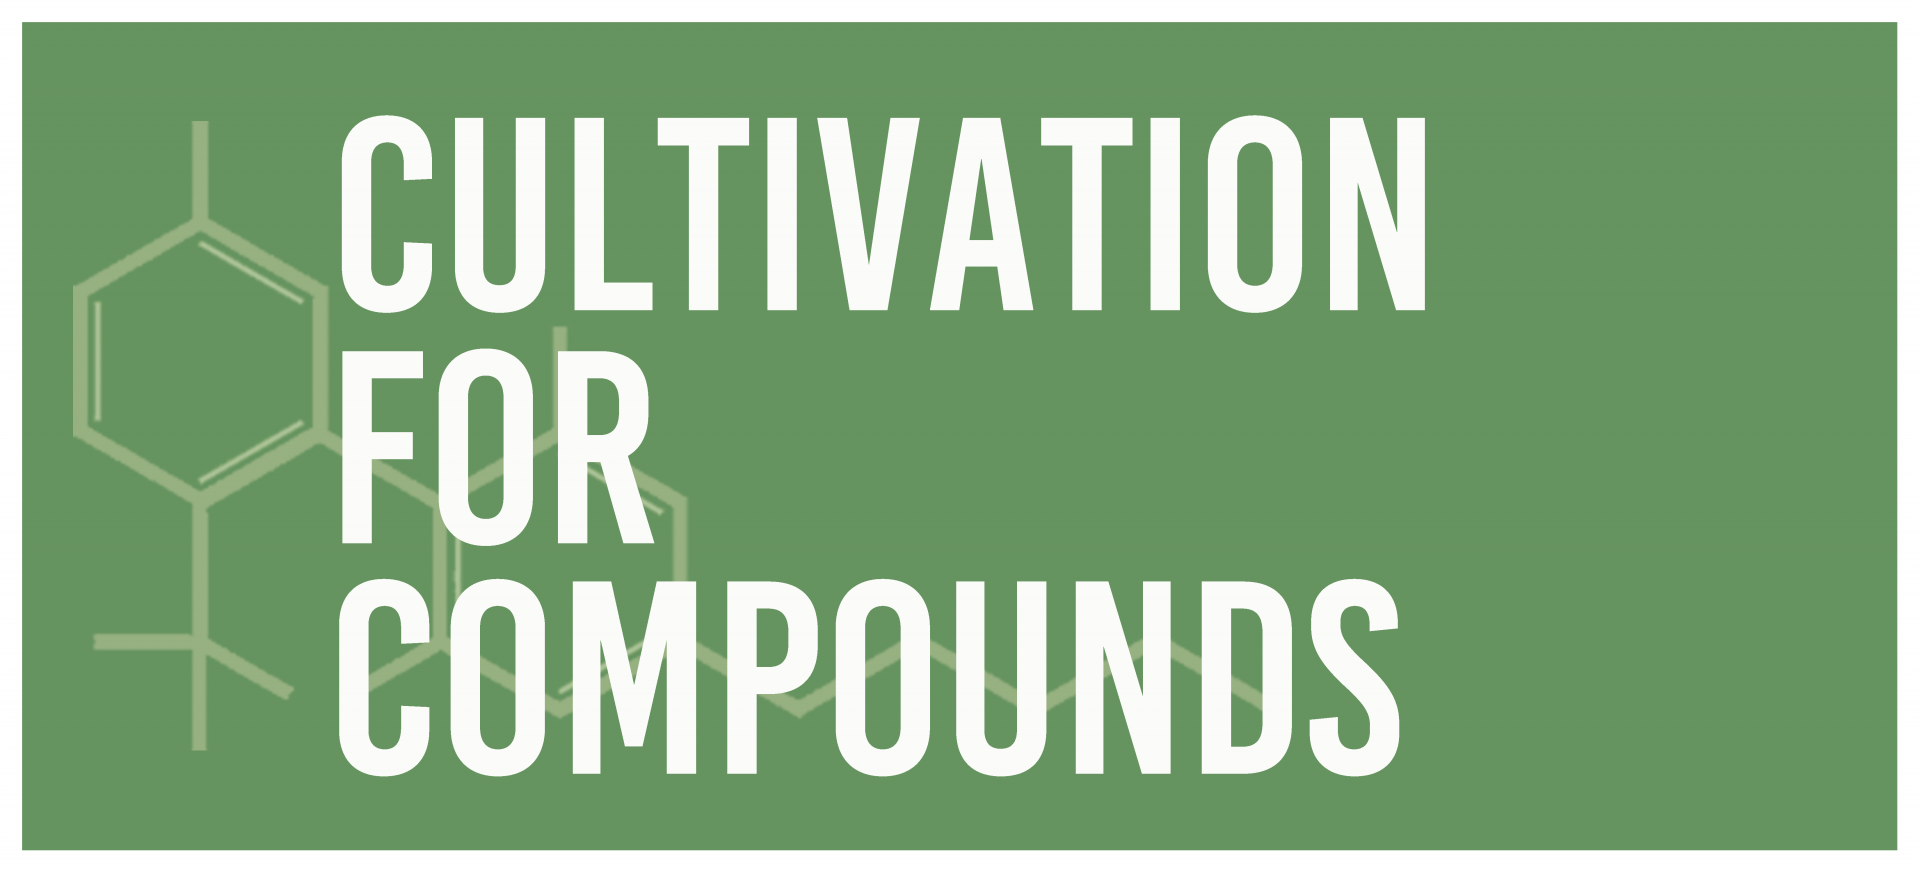 Cultivation For Compounds - logo